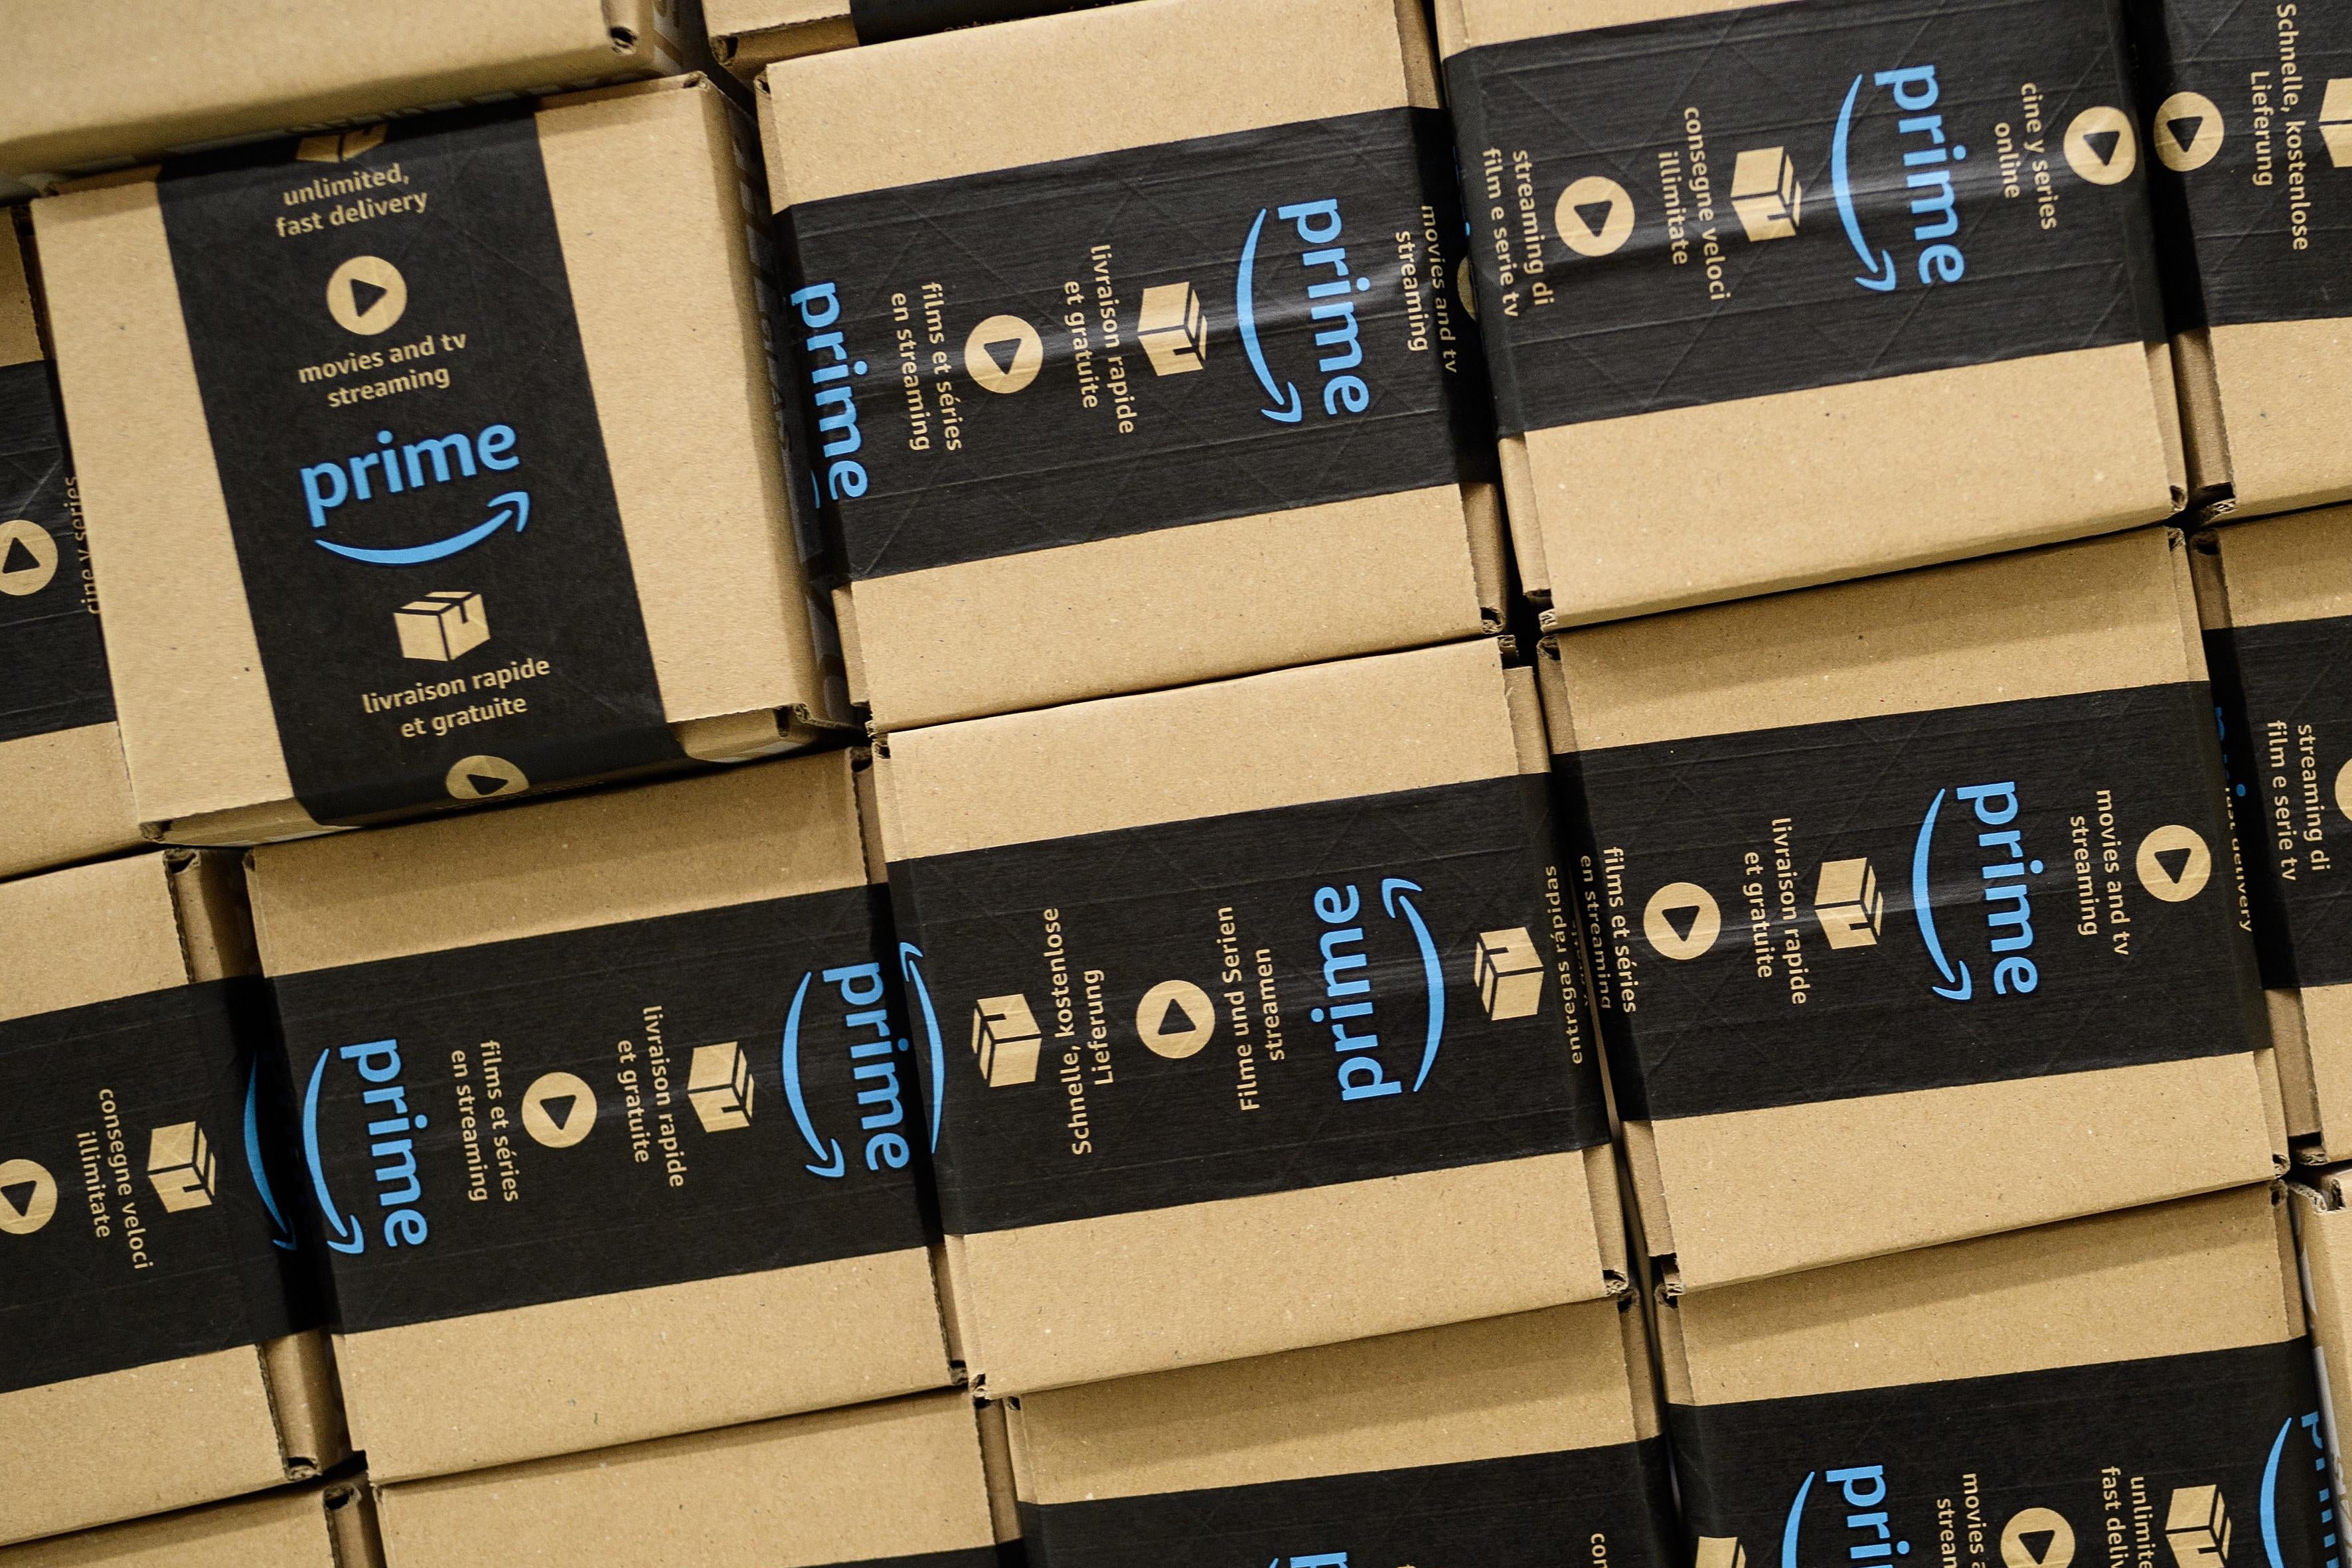 PETERBOROUGH, ENGLAND - NOVEMBER 15:  A close-up of a packaged Amazon Prime item in the Amazon Fulfilment centre on November 15, 2017 in Peterborough, England.  A report in the US has suggested that over half of all online purchases this Christmas will be made with Amazon.  (Photo by Leon Neal/Getty Images)